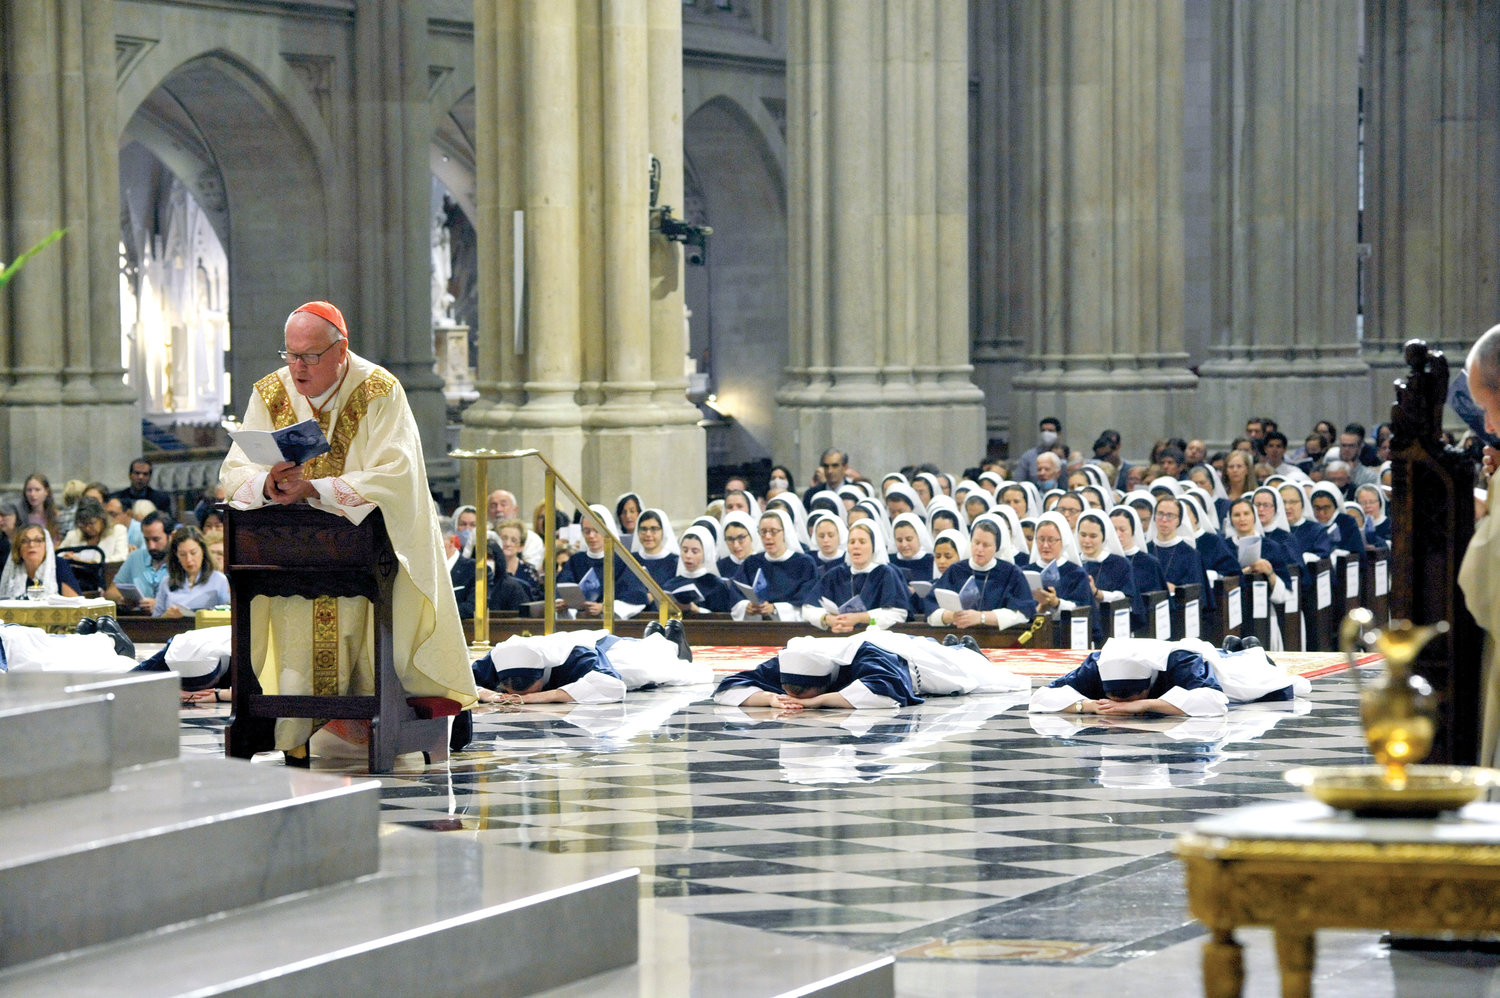 Cardinal Dolan celebrated Mass as six Sisters of Life made their final vows at St. Patrick’s Cathedral Aug. 6. Cardinal Dolan kneels in prayer with the Sisters professing their vows on the floor of the sanctuary during the Litany of the Saints.